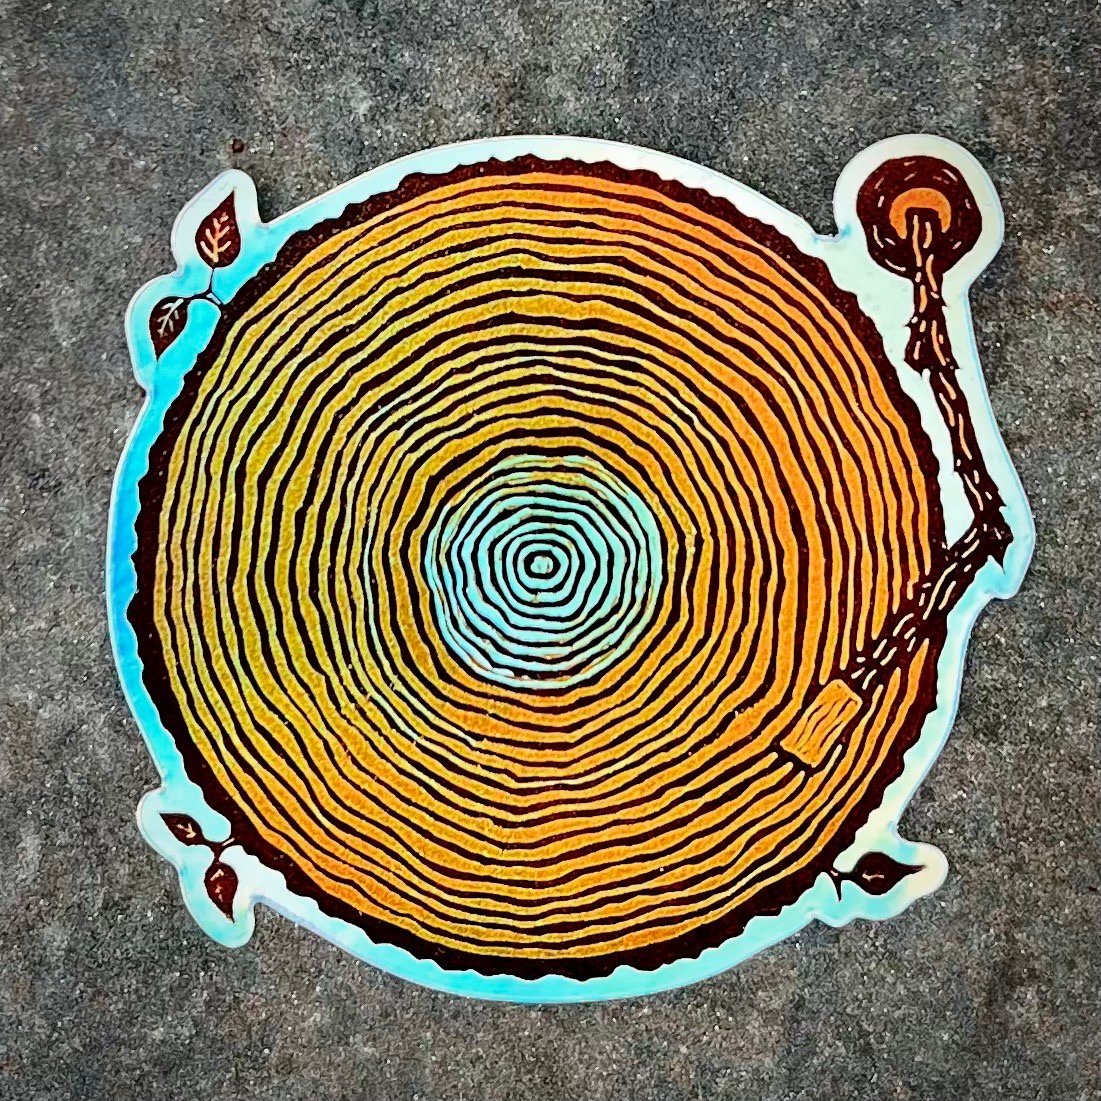 Image of Cross-section holographic sticker